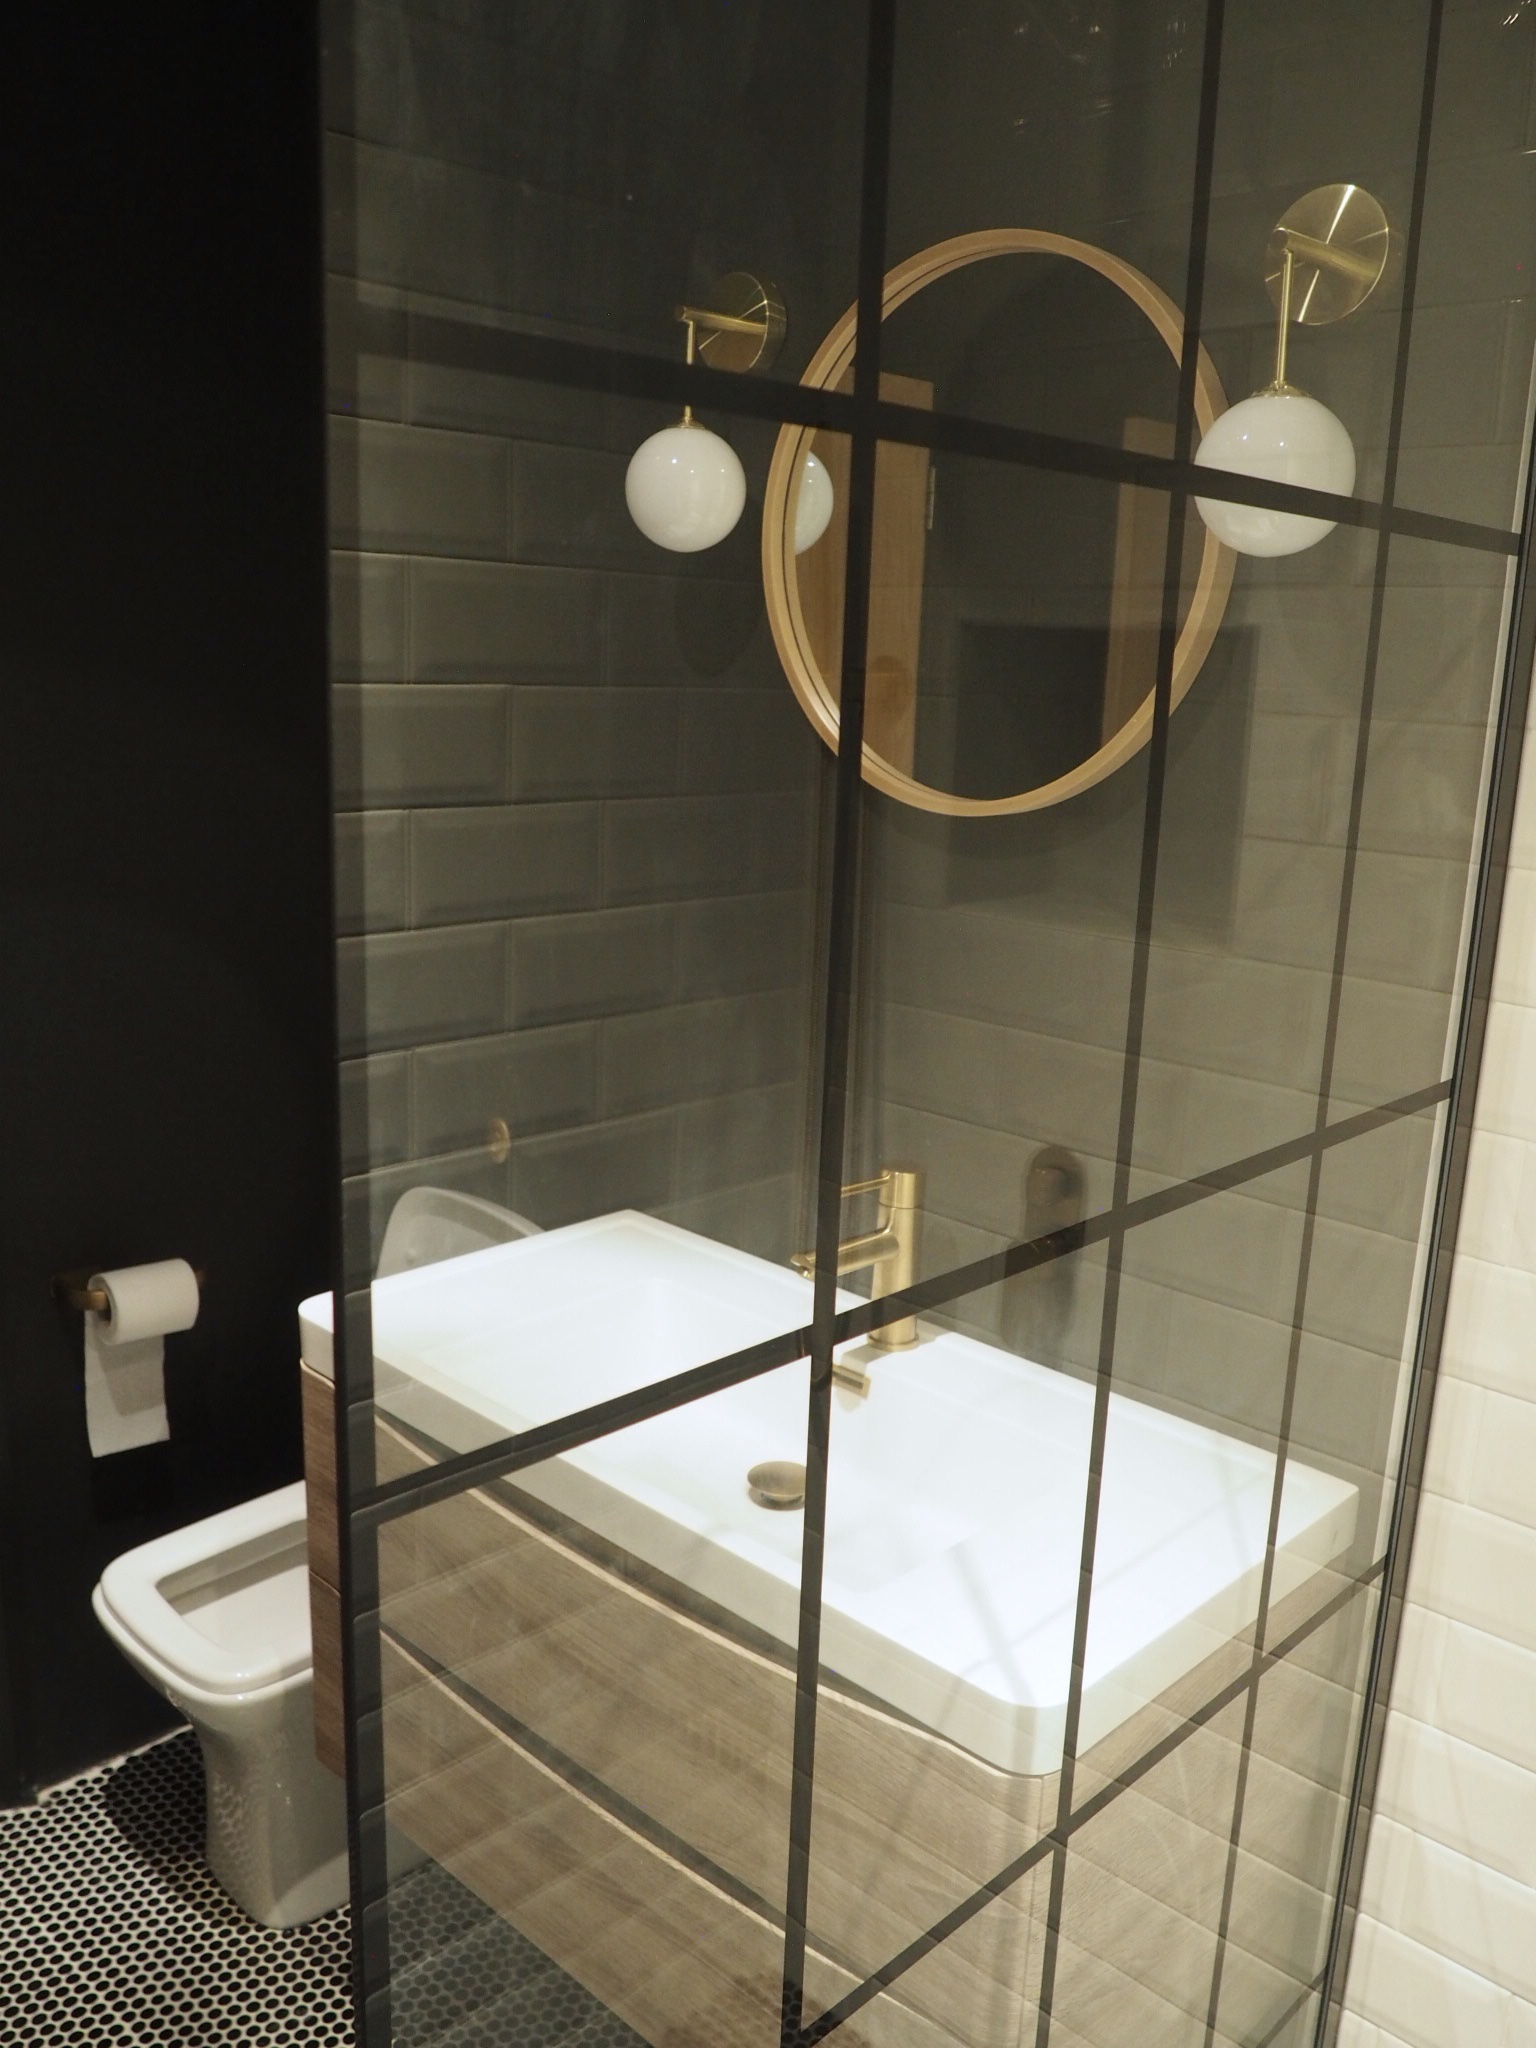 View from inside the shower showing the Crittal style shower screen and natural wood vanity unit with round wood Zara Home mirror and gold and white wall lights above